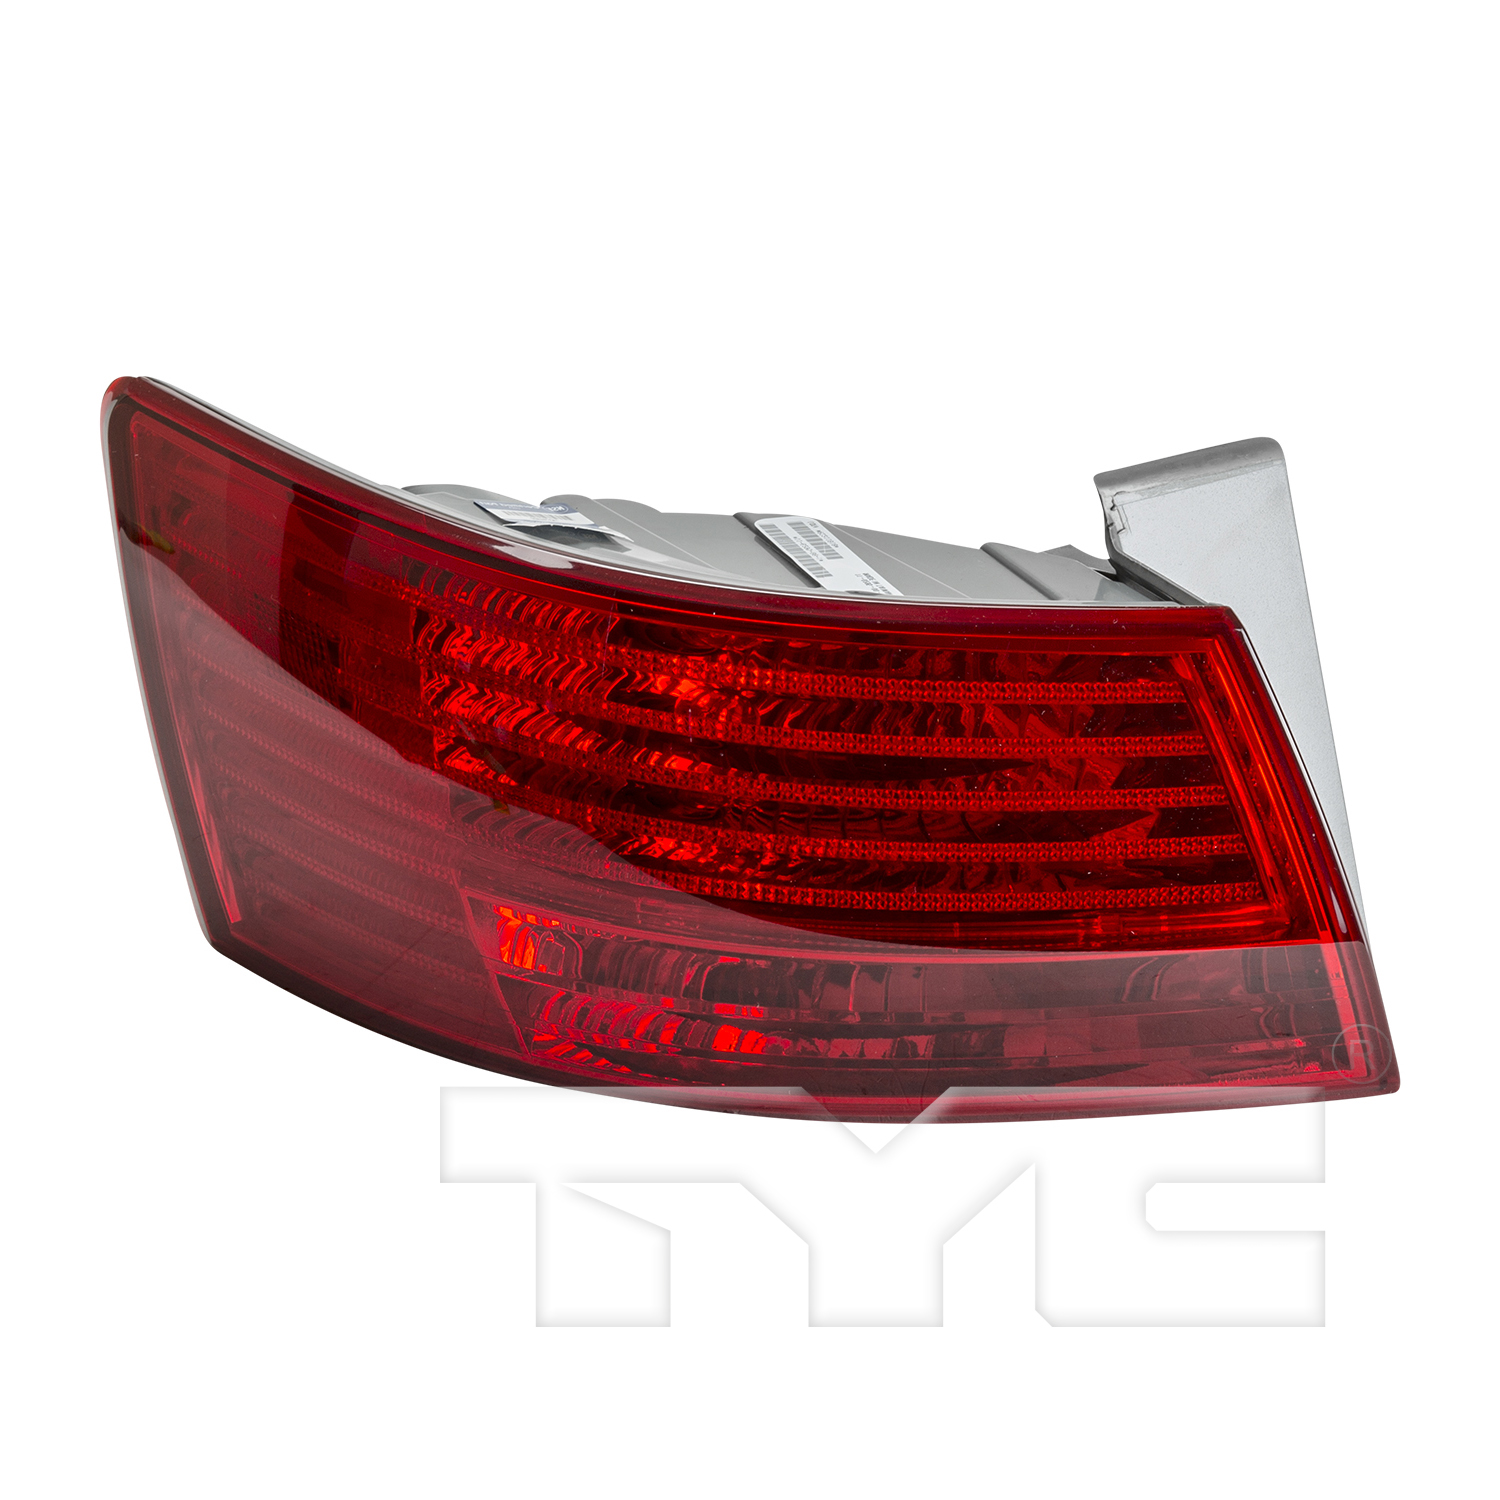 Aftermarket TAILLIGHTS for HYUNDAI - SONATA, SONATA,08-10,LT Taillamp assy outer